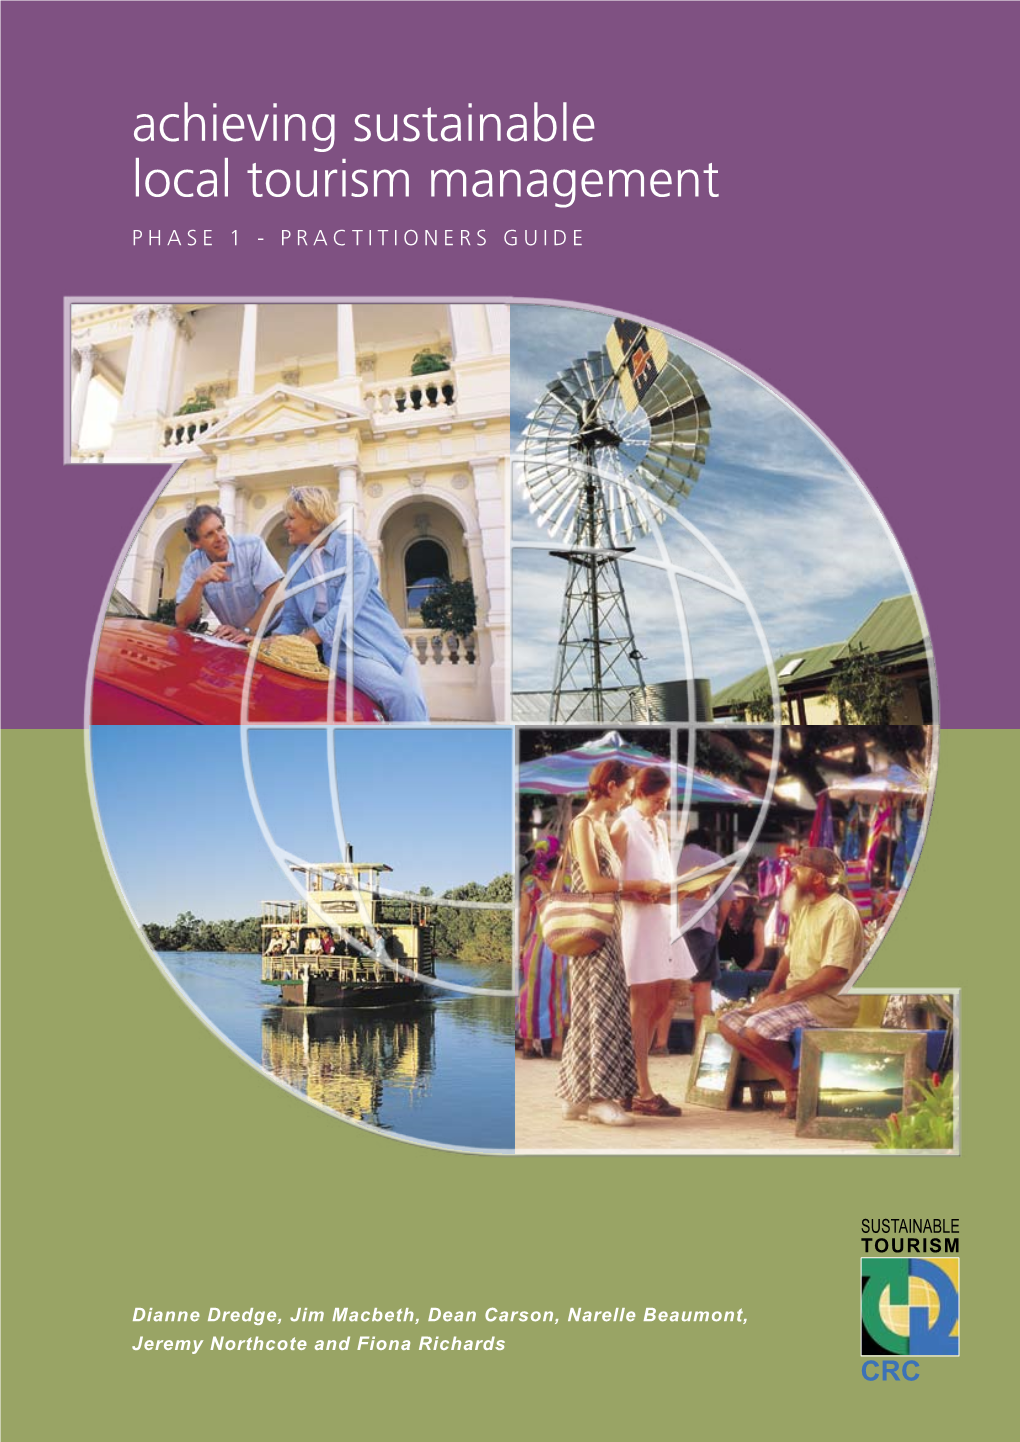 Achieving Sustainable Local Tourism Management Phase 1 - Practitioners Guide